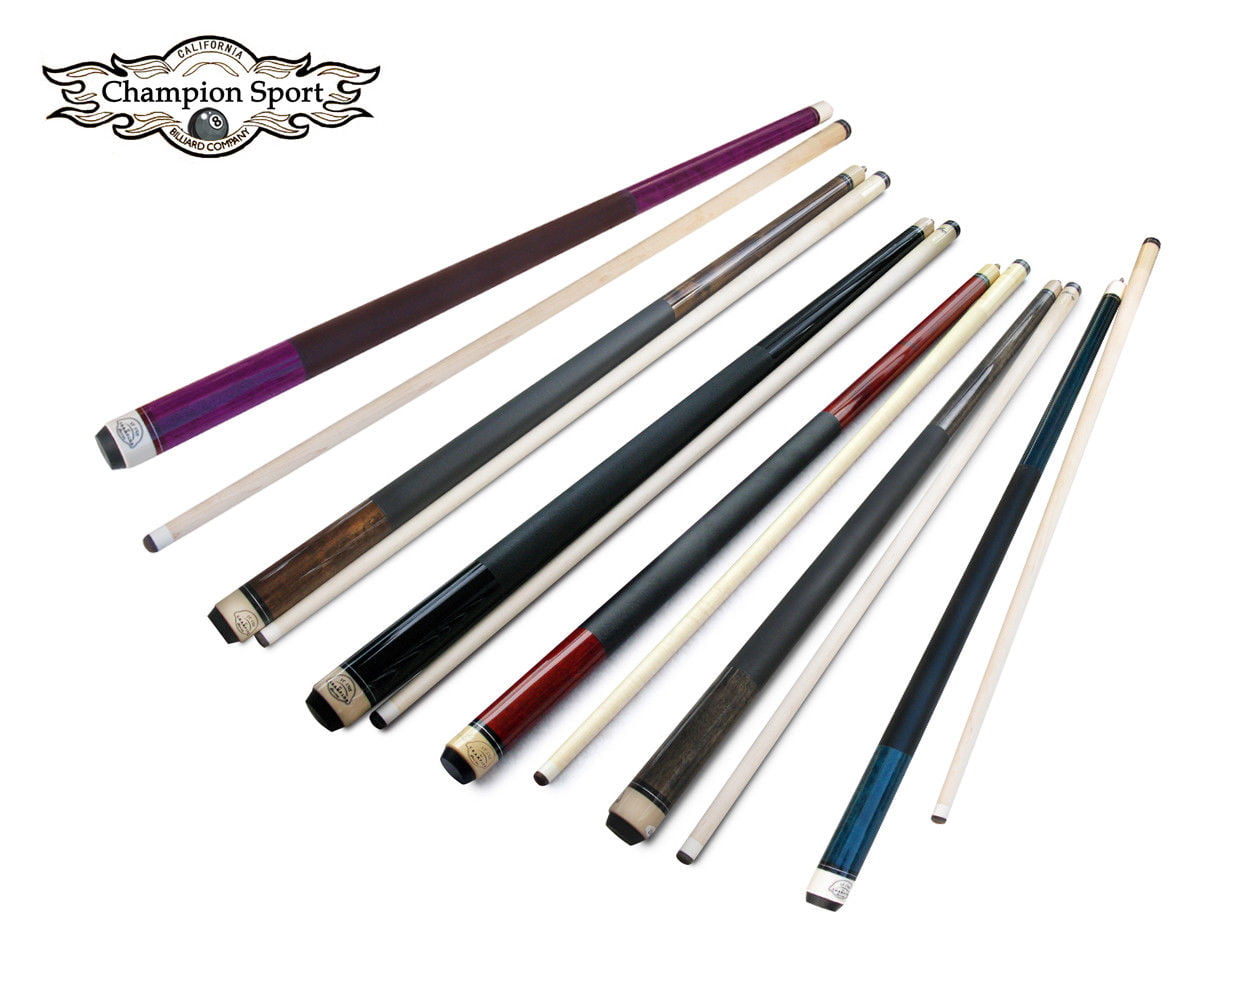 2 x 36"  SHORT POOL CUES IDEAL FOR KIDS & SMALL SPACES